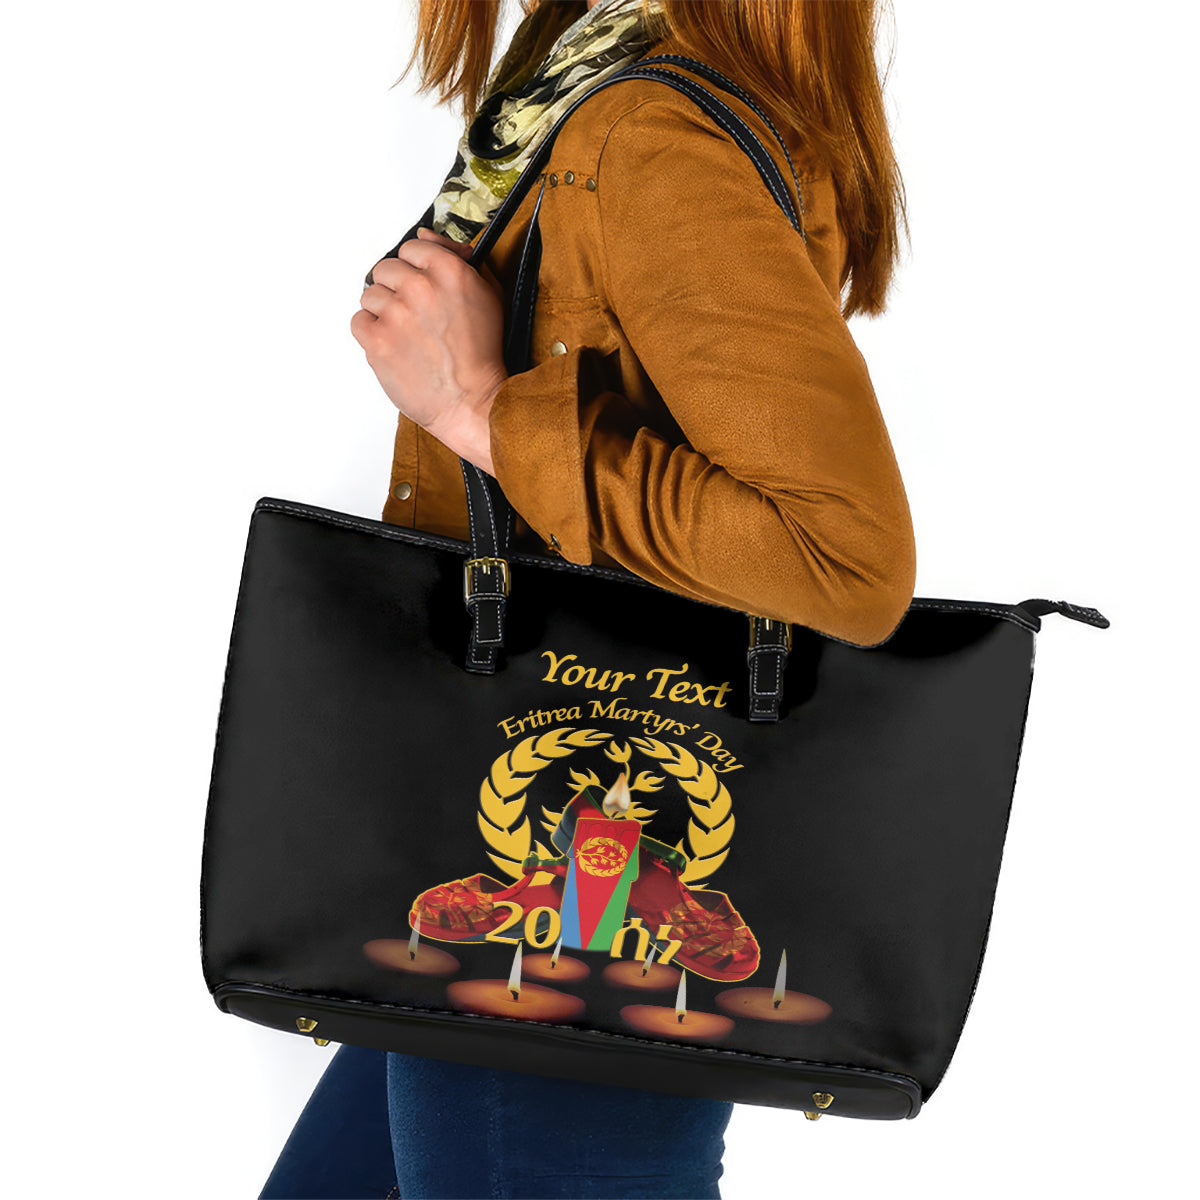 Custom Eritrea Martyrs' Day Leather Tote Bag 20 June Shida Shoes With Candles - Black